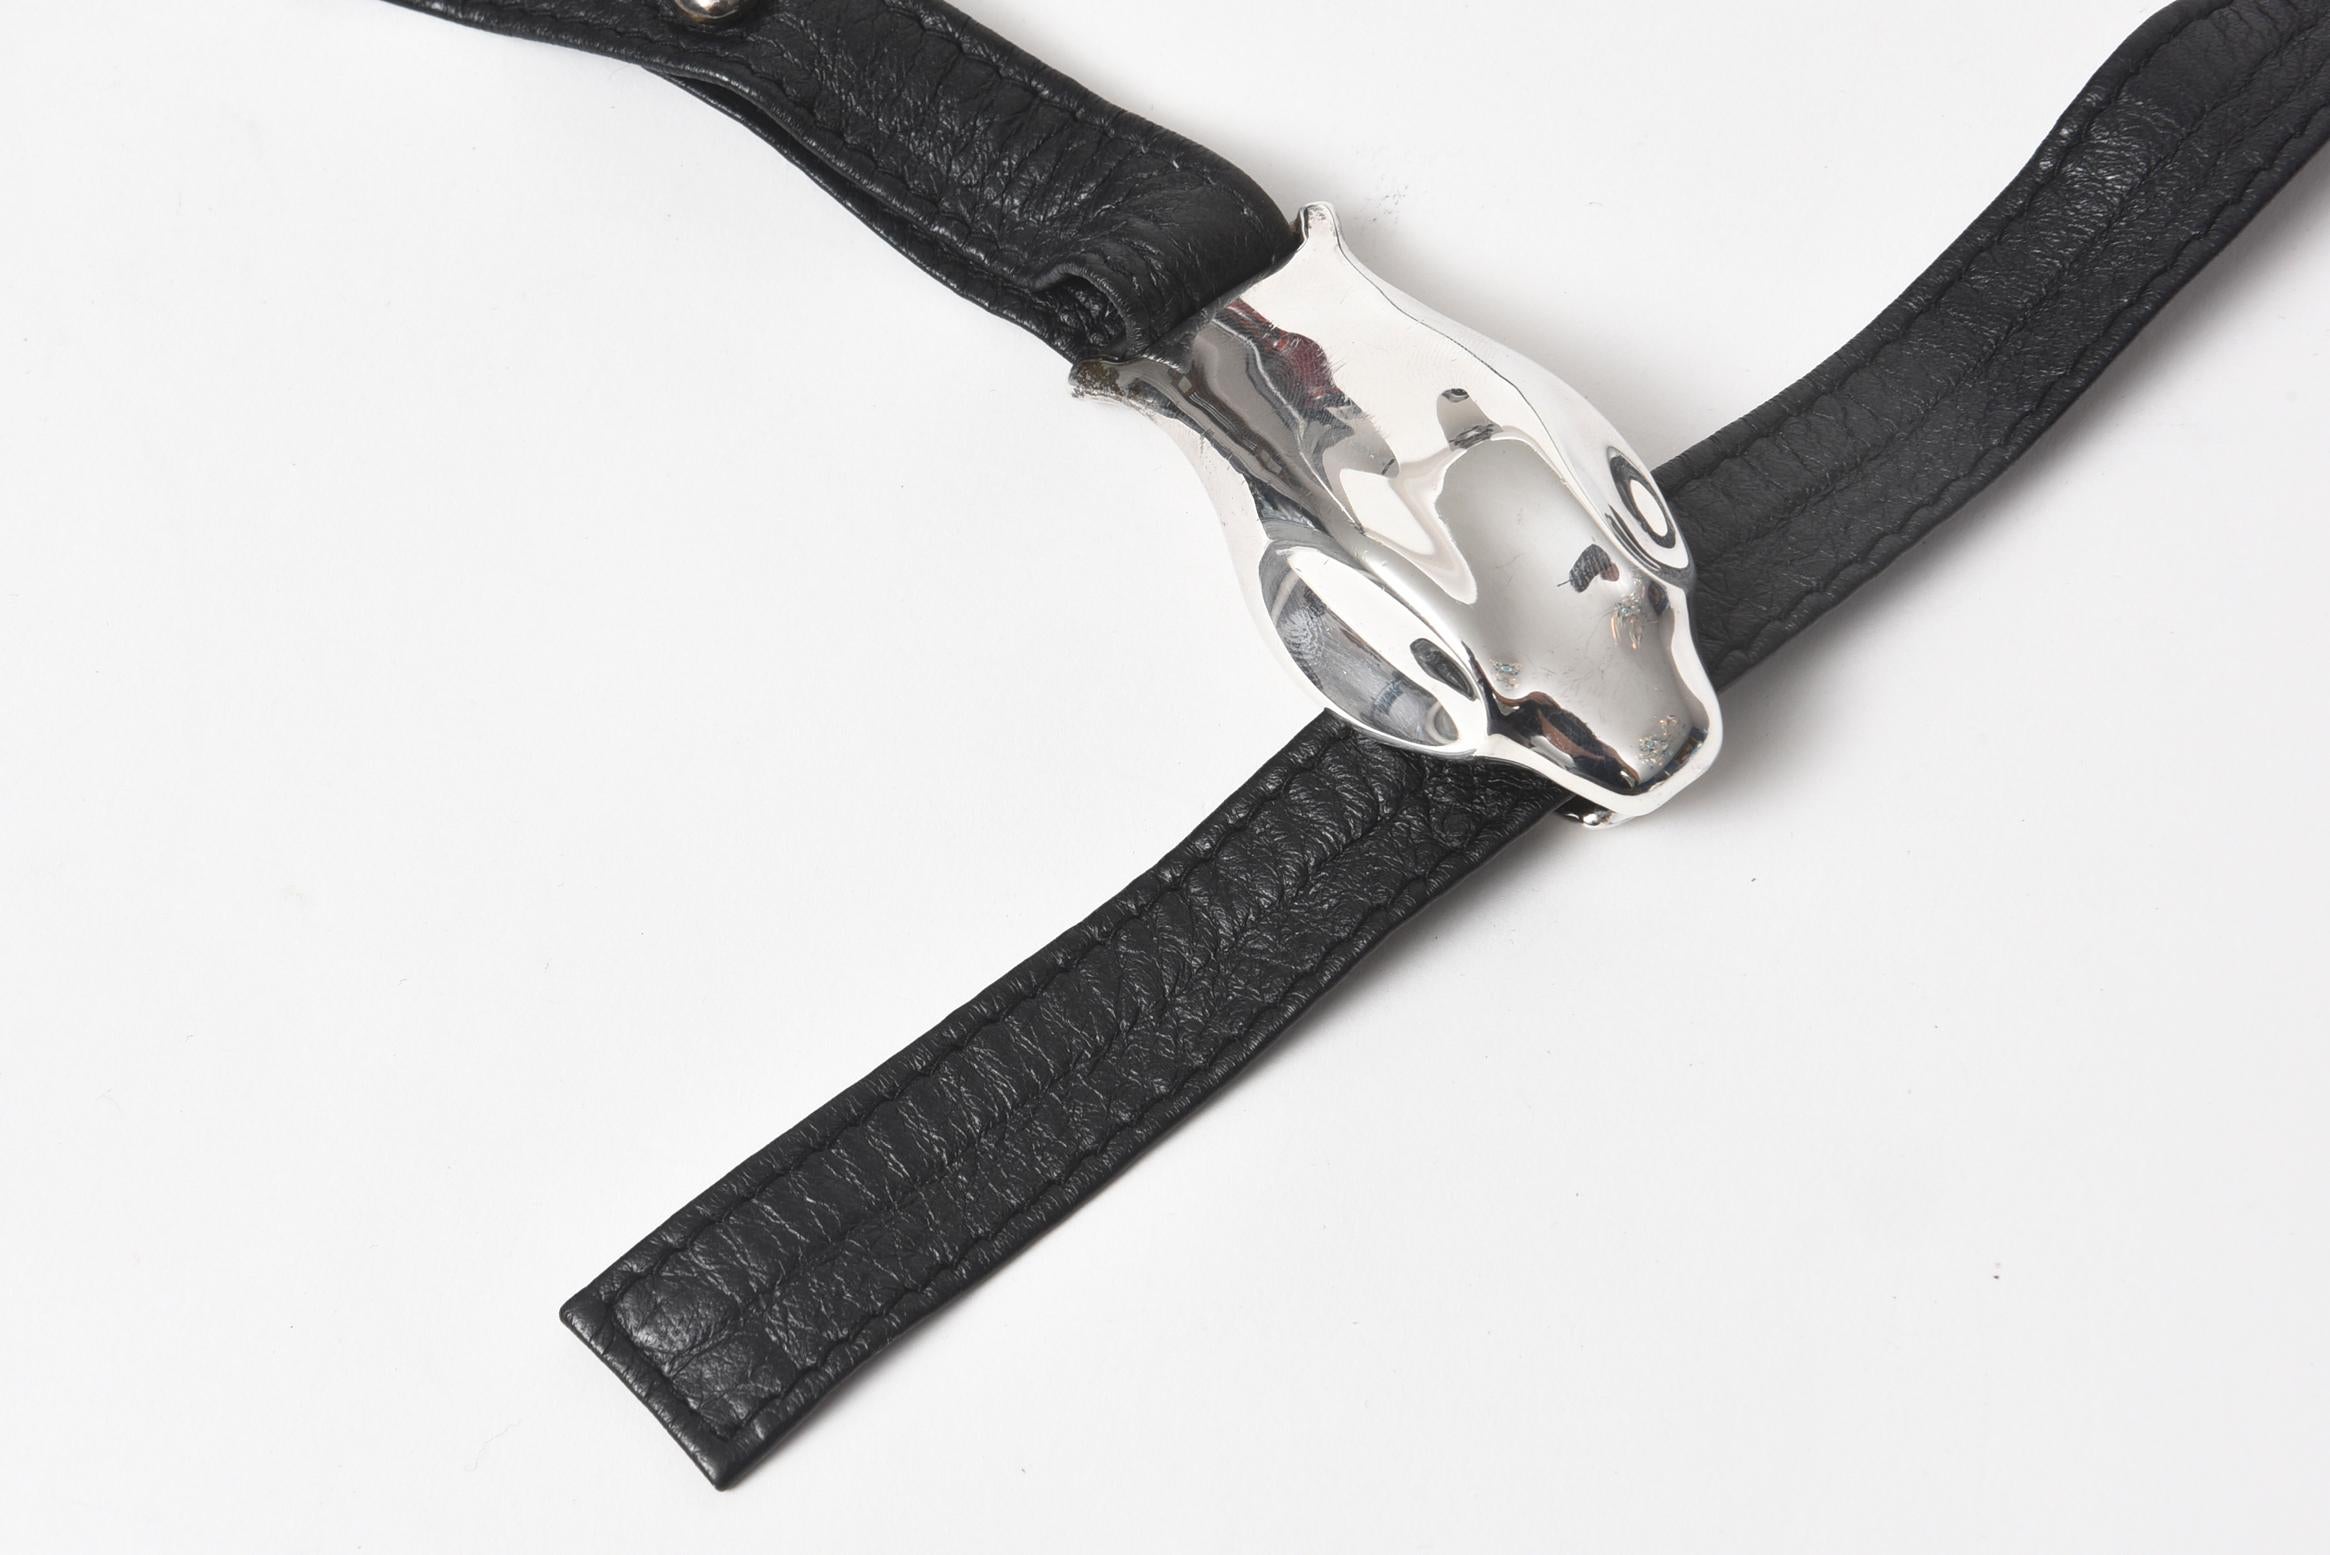 Vintage serpentine belt designed for Tiffany & Co. by Elsa Peretti (marked). The center of the belt has a three-dimensional snake head made of sterling silver. The snake's body is the black leather belt with a unique design that makes it fully